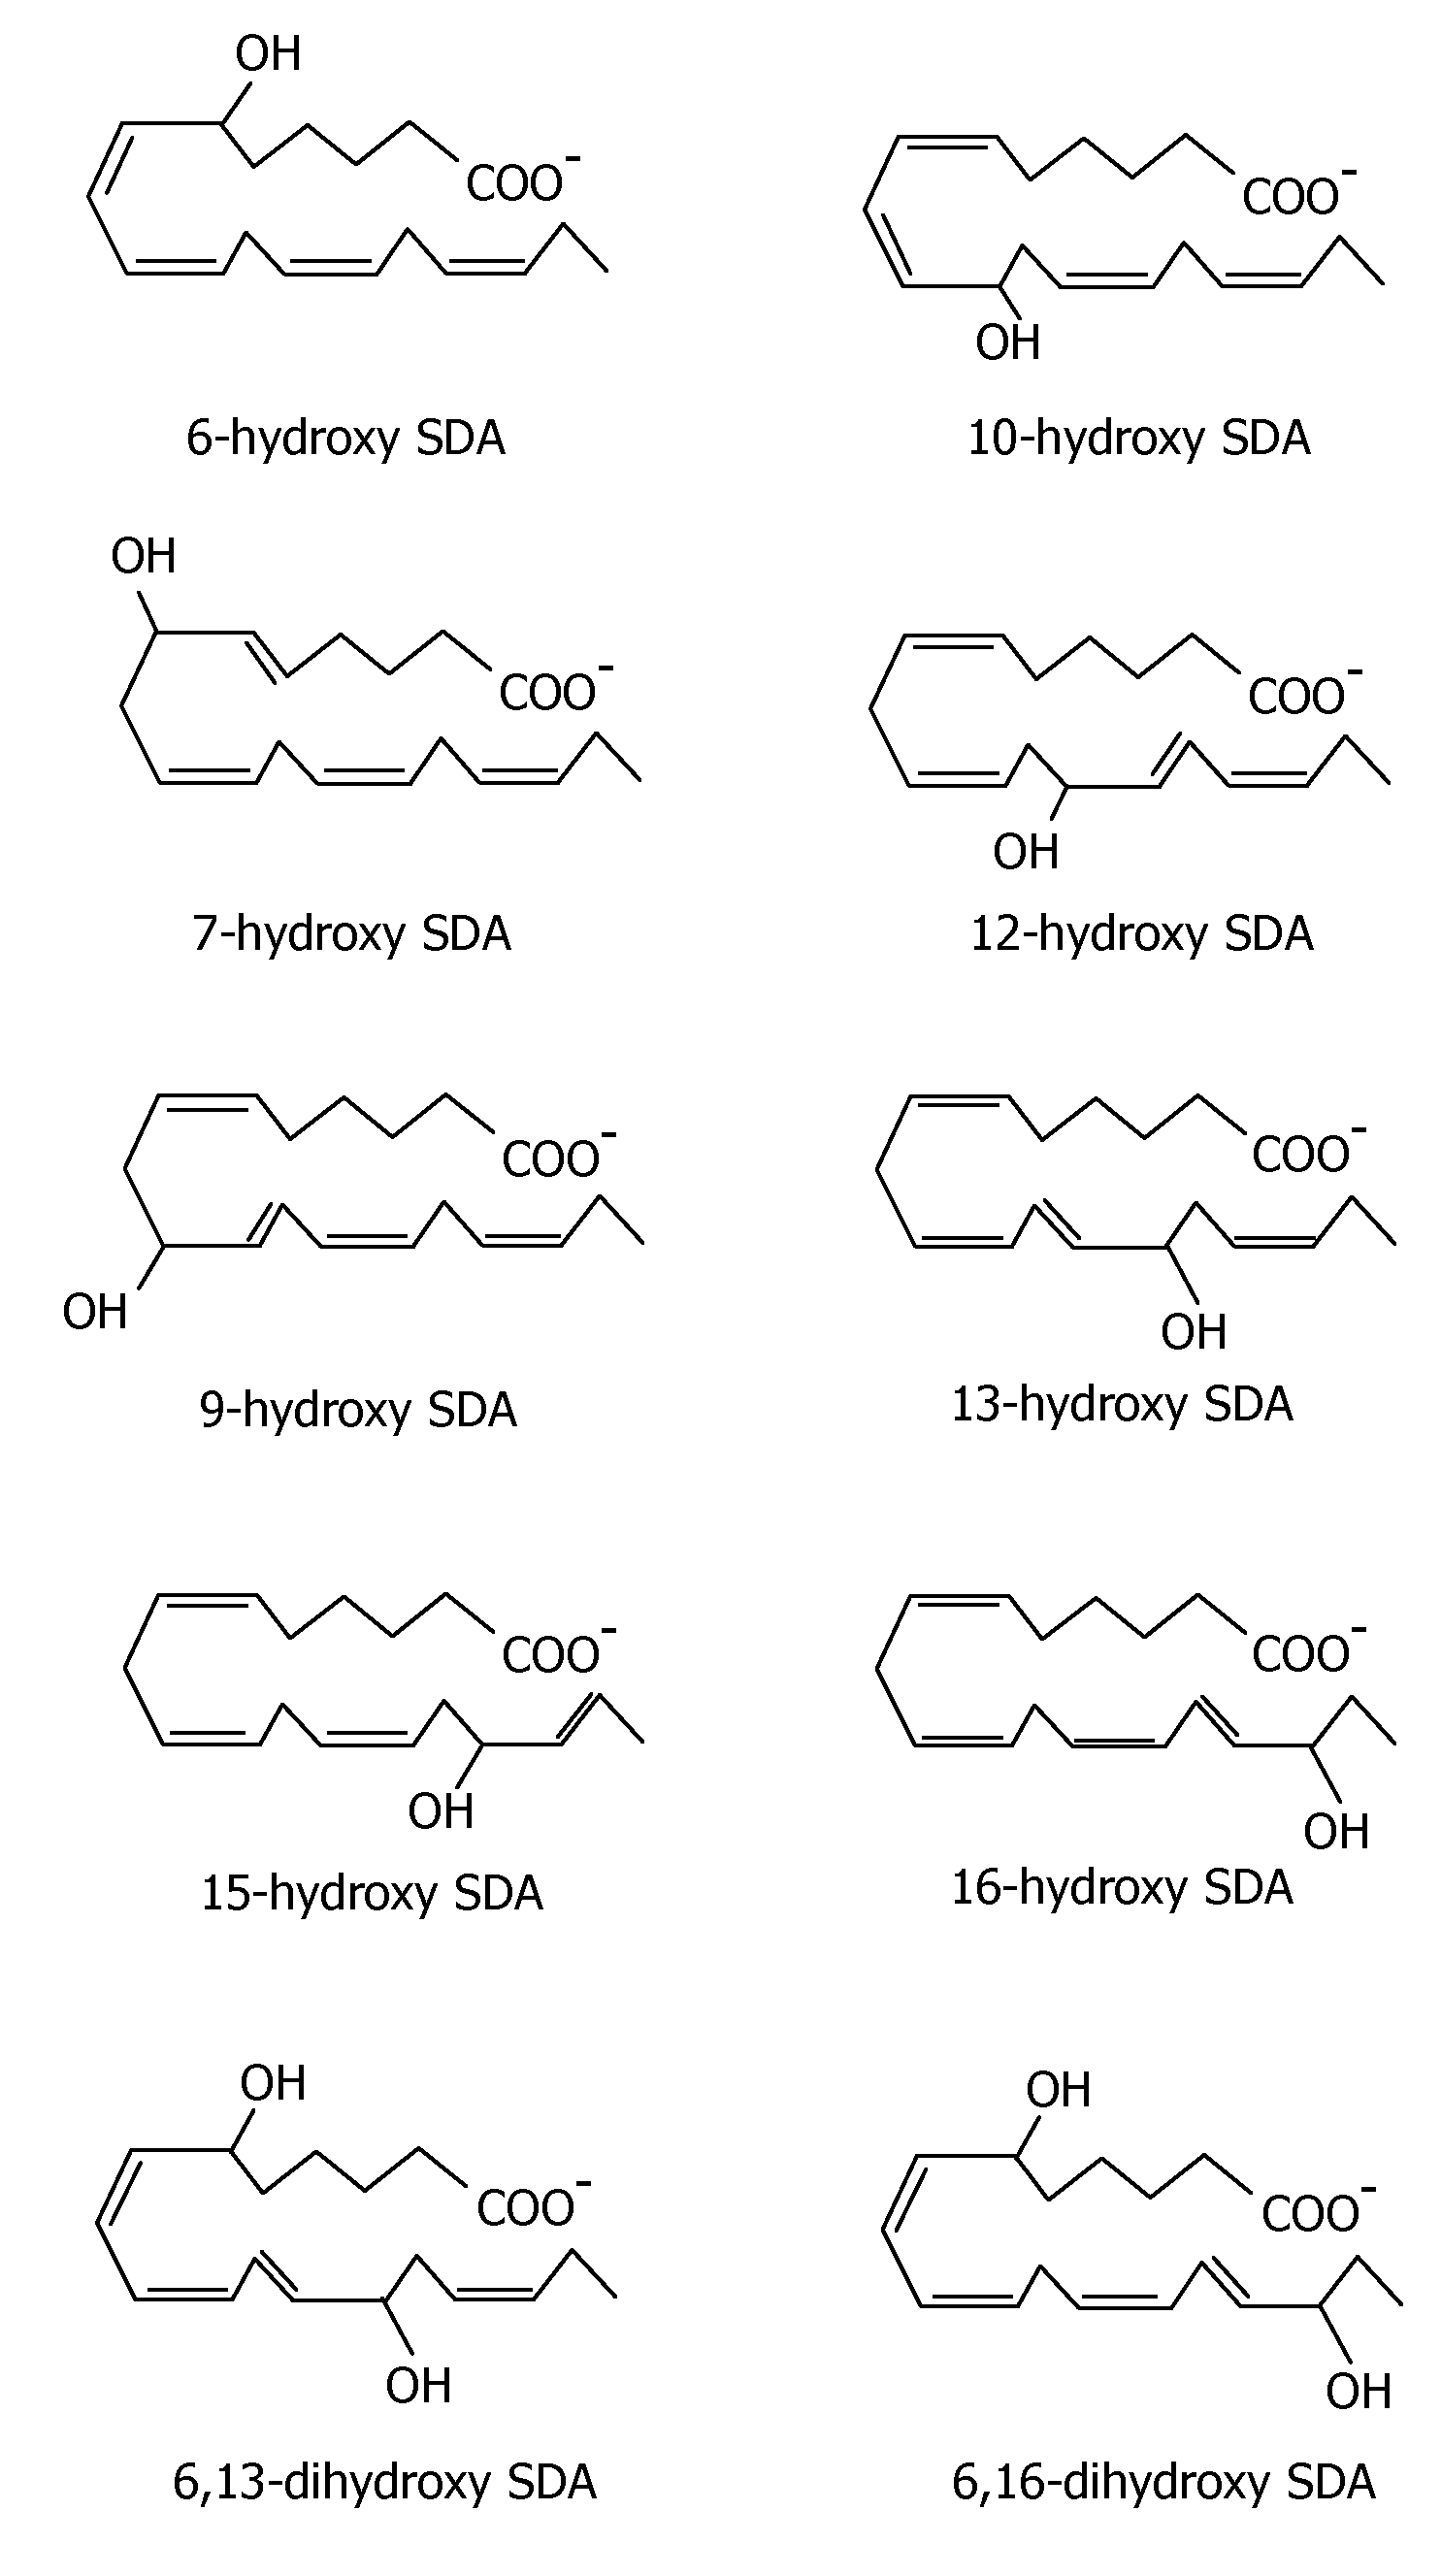 Oxylipins from stearidonic acid and .gamma.-linolenic acid and methods of making and using the same